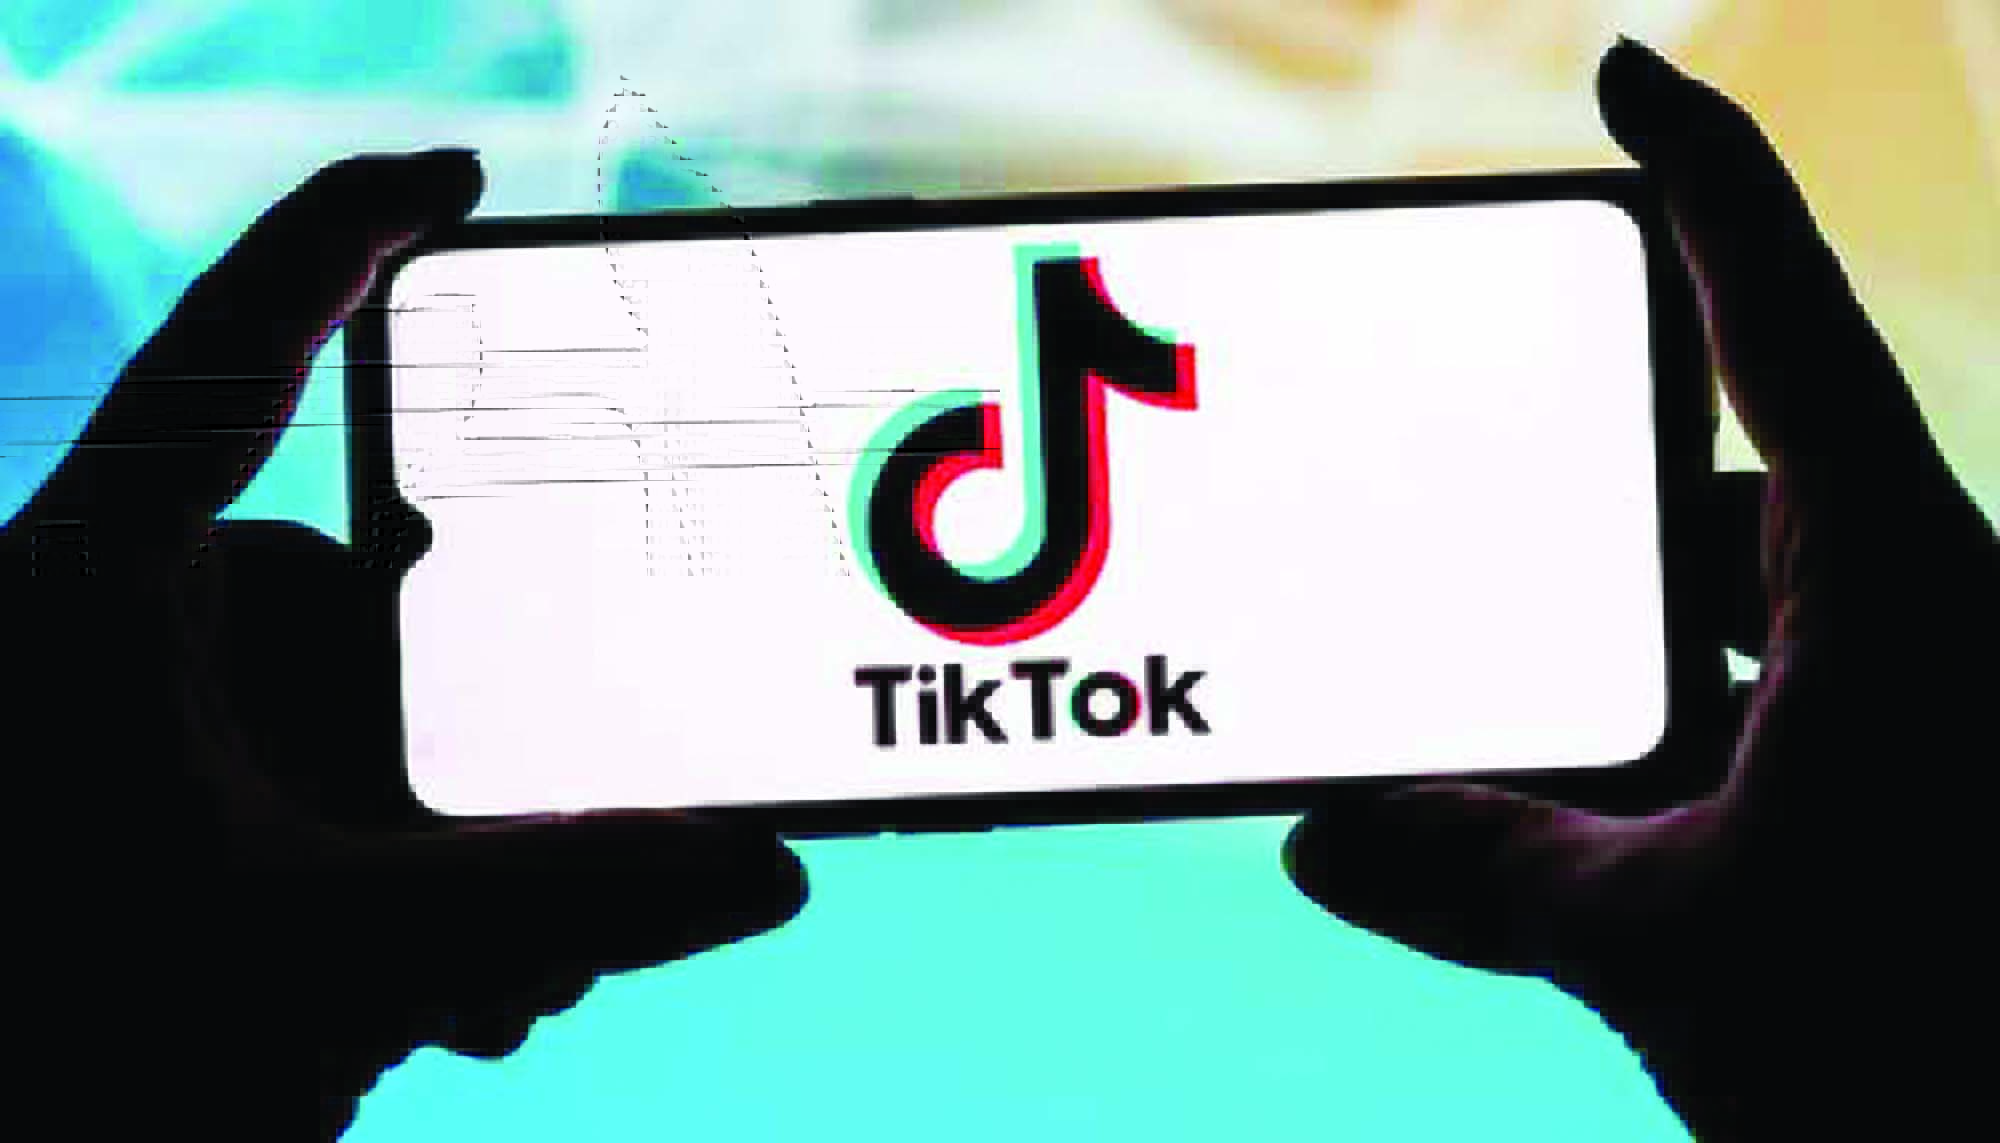 More than 34 million Bangladeshi videos have been removed by TikTok